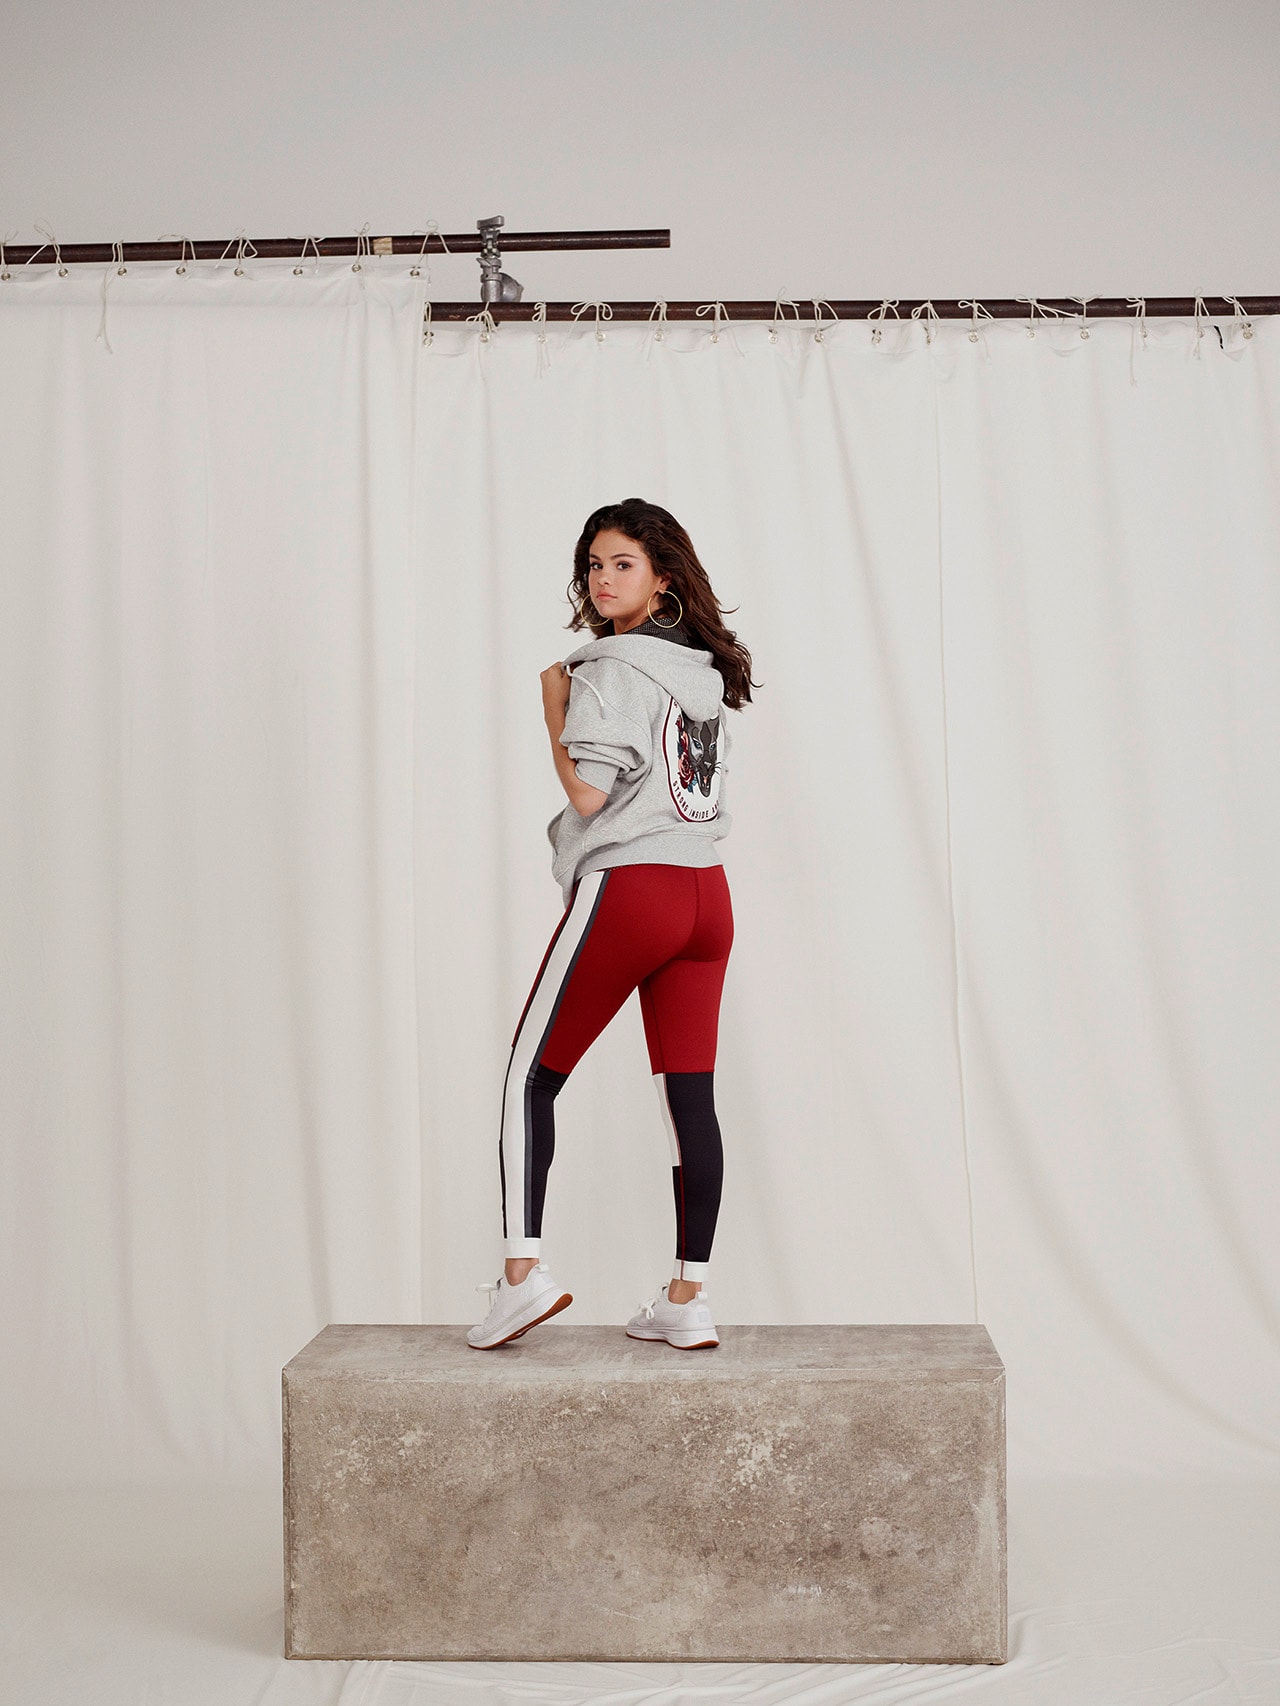 Selena Gomez PUMA Strong Girl Collaboration Campaign SG Runner Sneakers Sportswear Activewear Sports Defy Mid